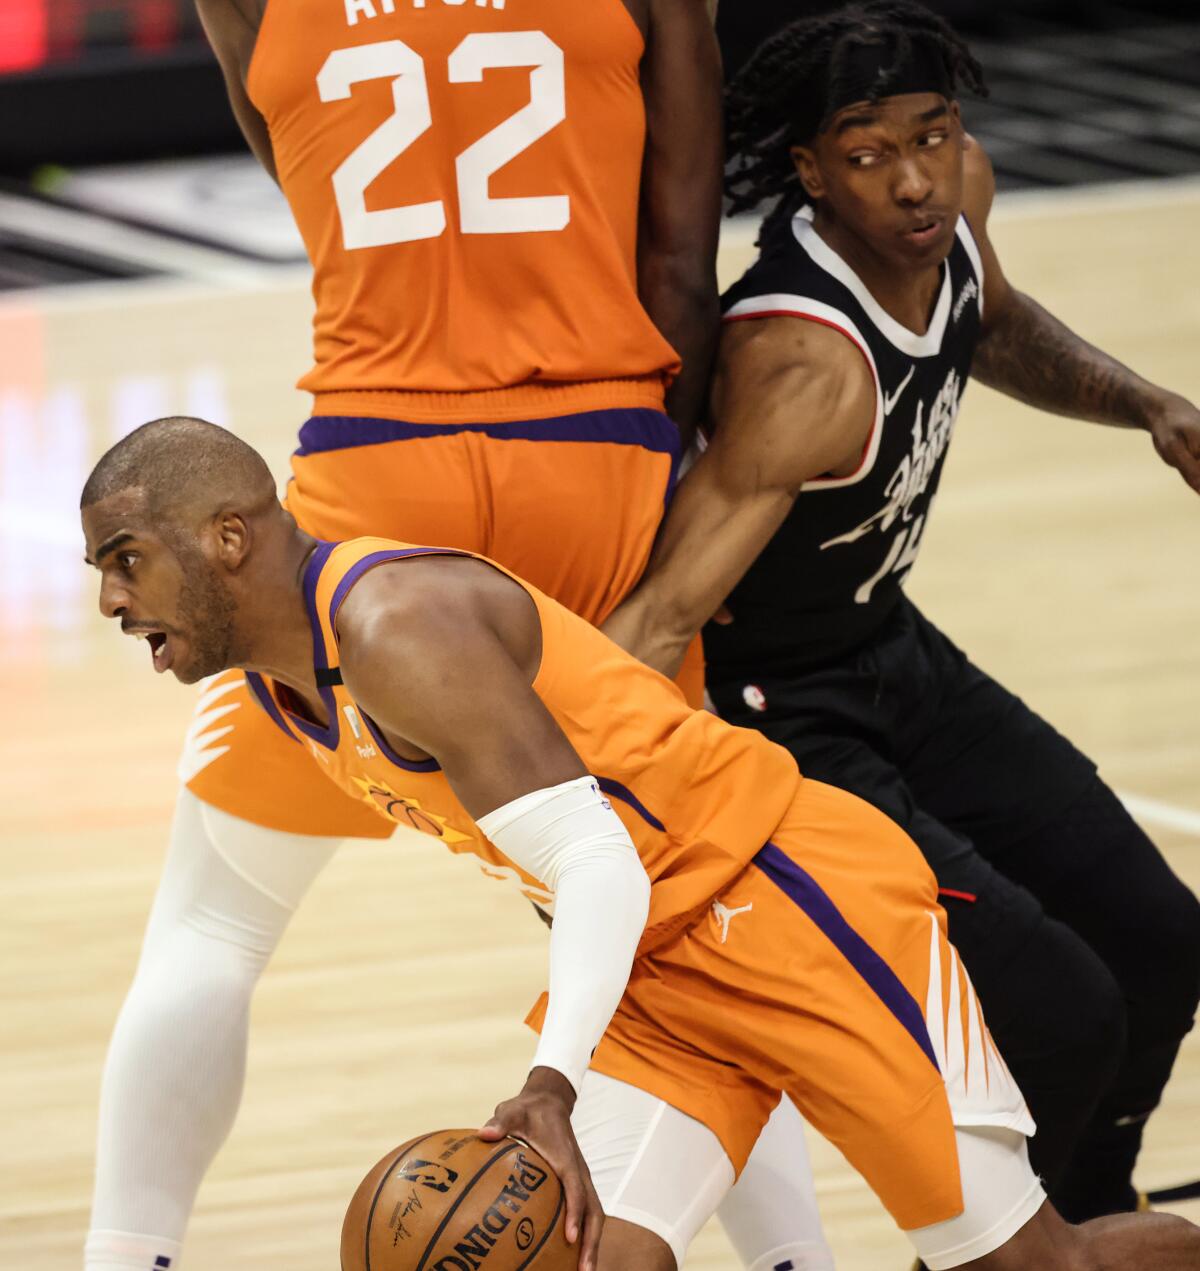 The Suns' Chris Paul drives past the Clippers' Terance Mann after getting a screen from Deandre Ayton in Game 3.